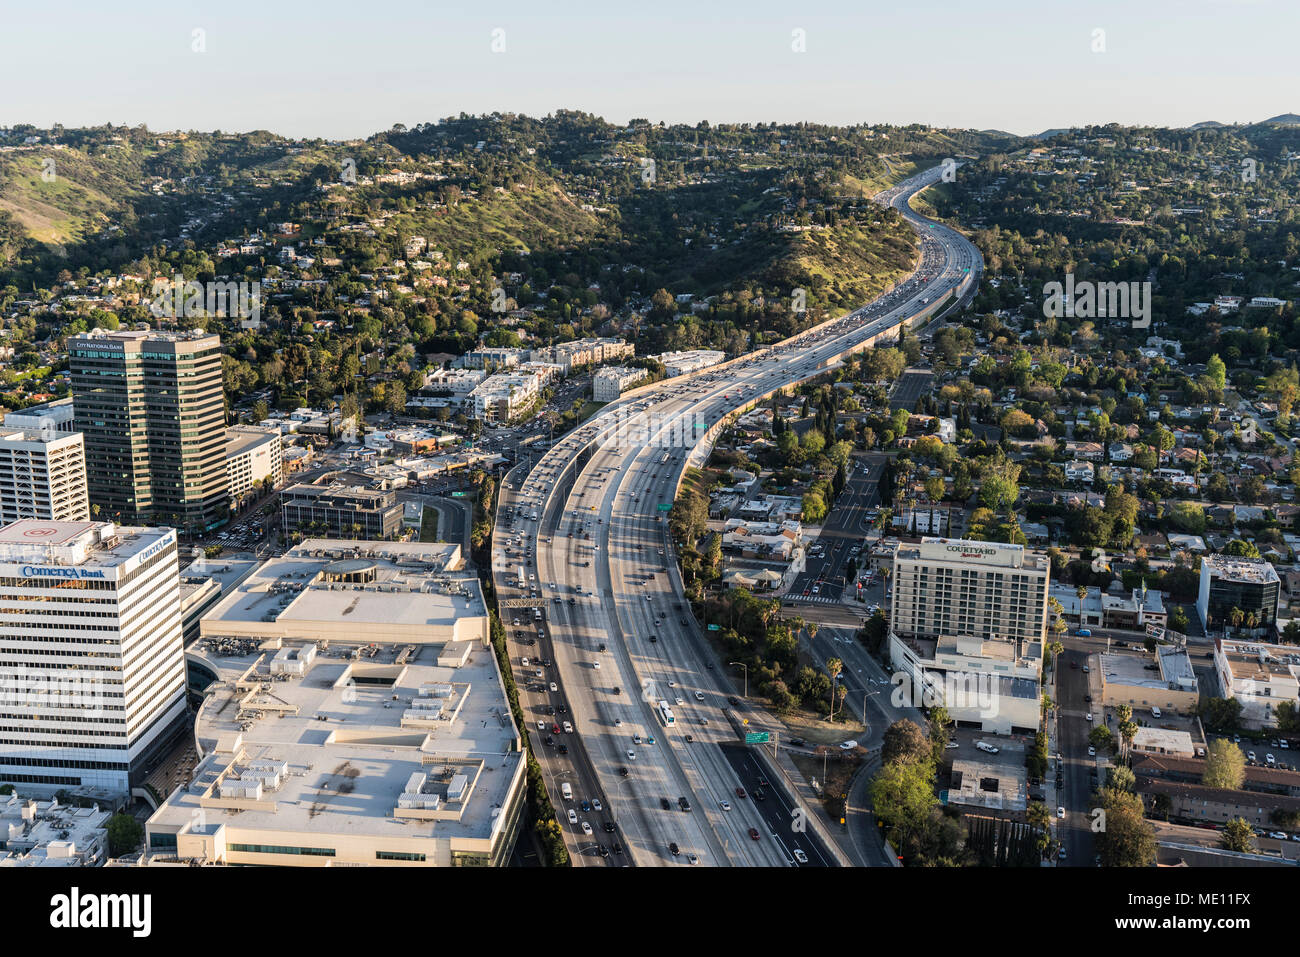 Los Angeles, California, USA - April 18, 2018:  Late afternoon aerial view of 405 Freeway and Sepulveda Pass in the San Fernando Valley. Stock Photo